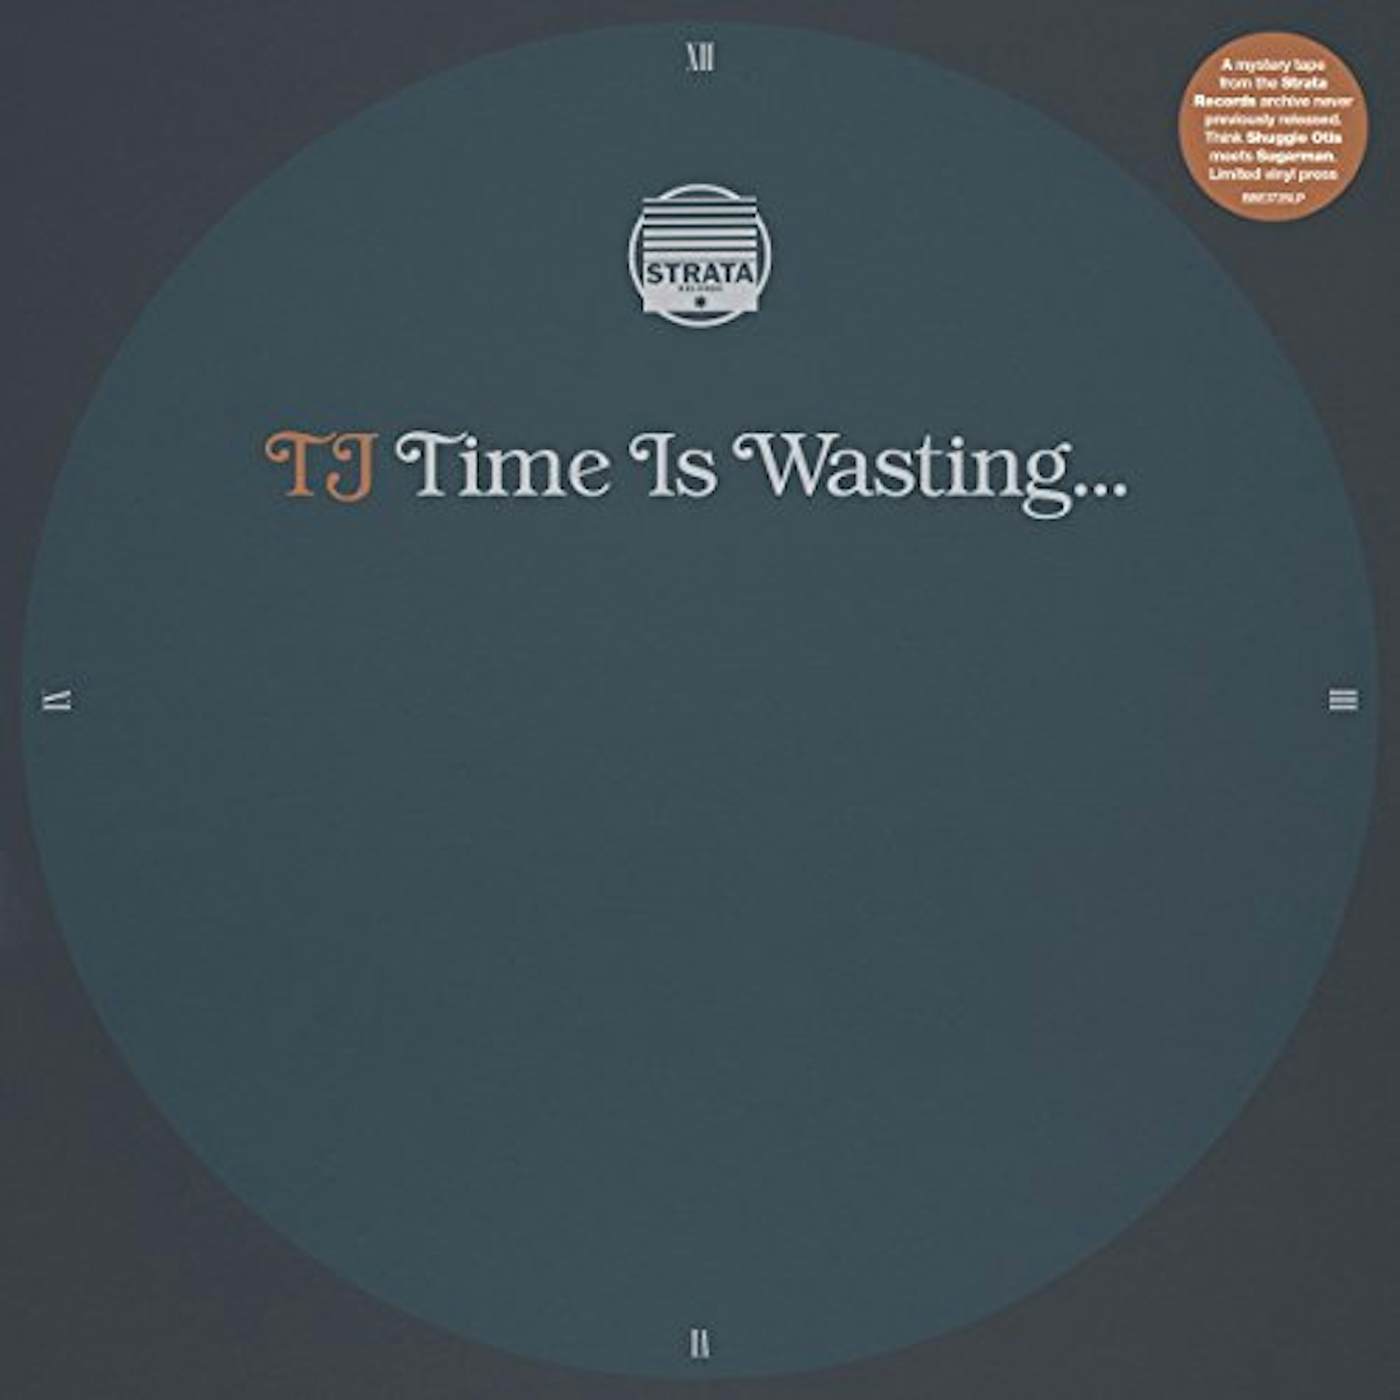 TJ Time is Wasting Vinyl Record